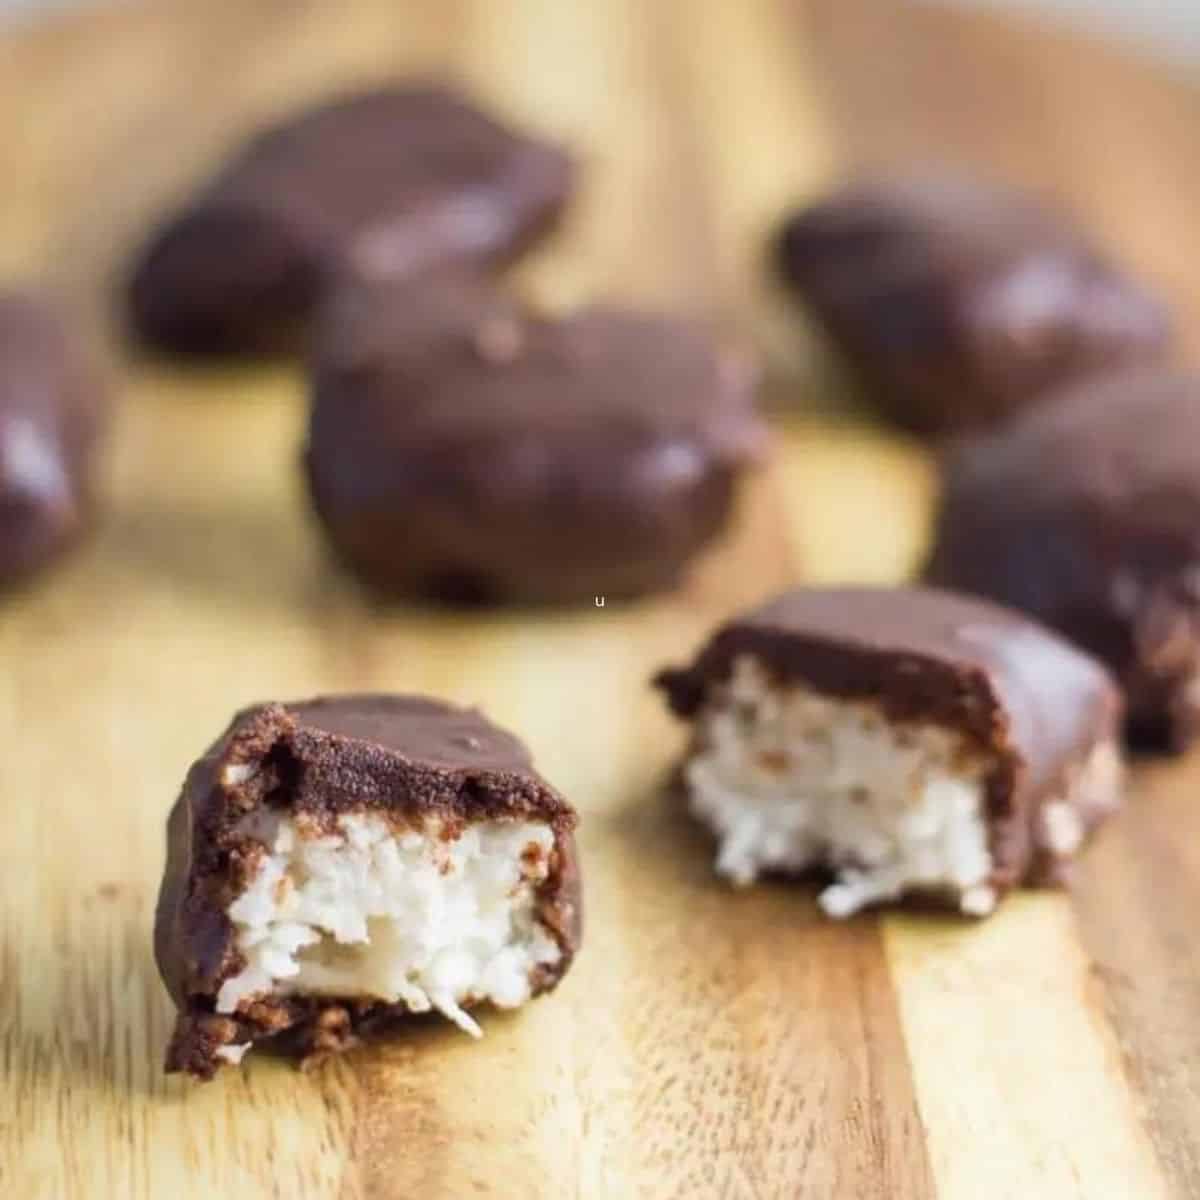 Coconut chocolate bars on a wooden board, with one cut in half showing the coconut mixture.